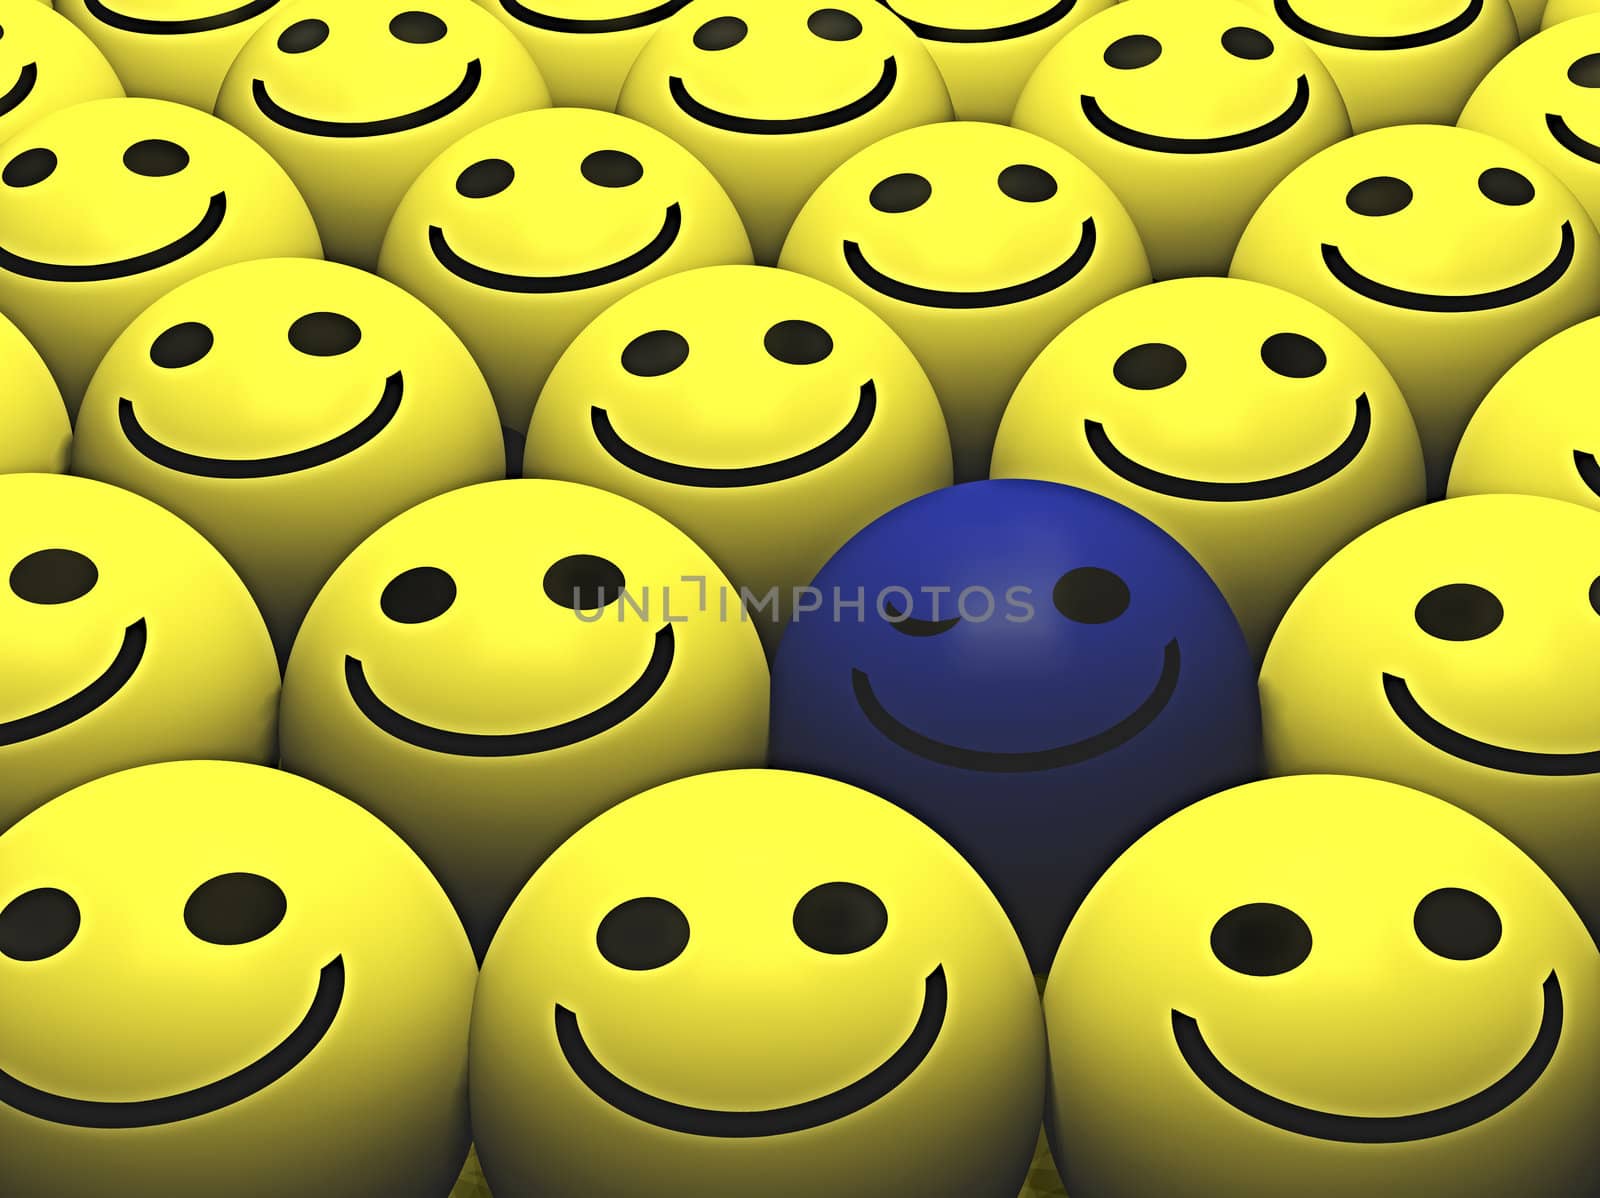 A winking blue smiley stands out from the crowd